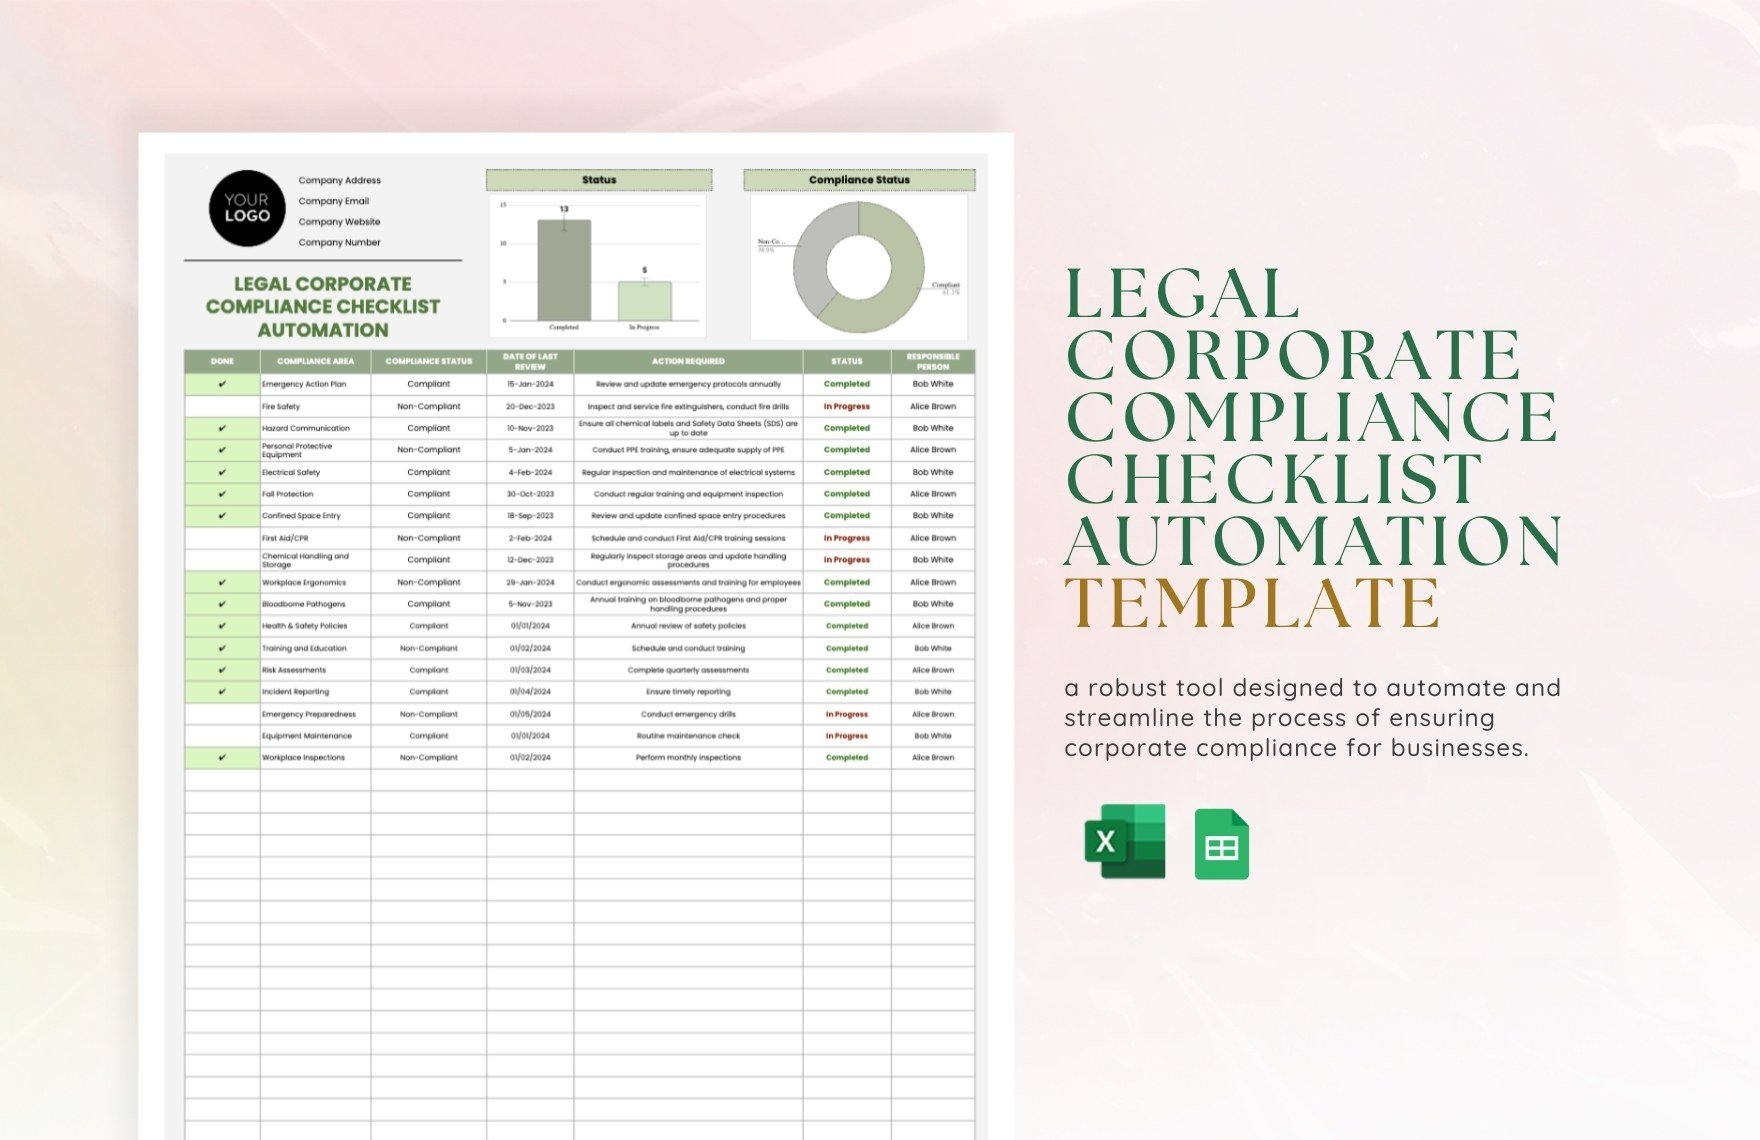 Legal Corporate Compliance Checklist Automation Template in Excel, Google Sheets